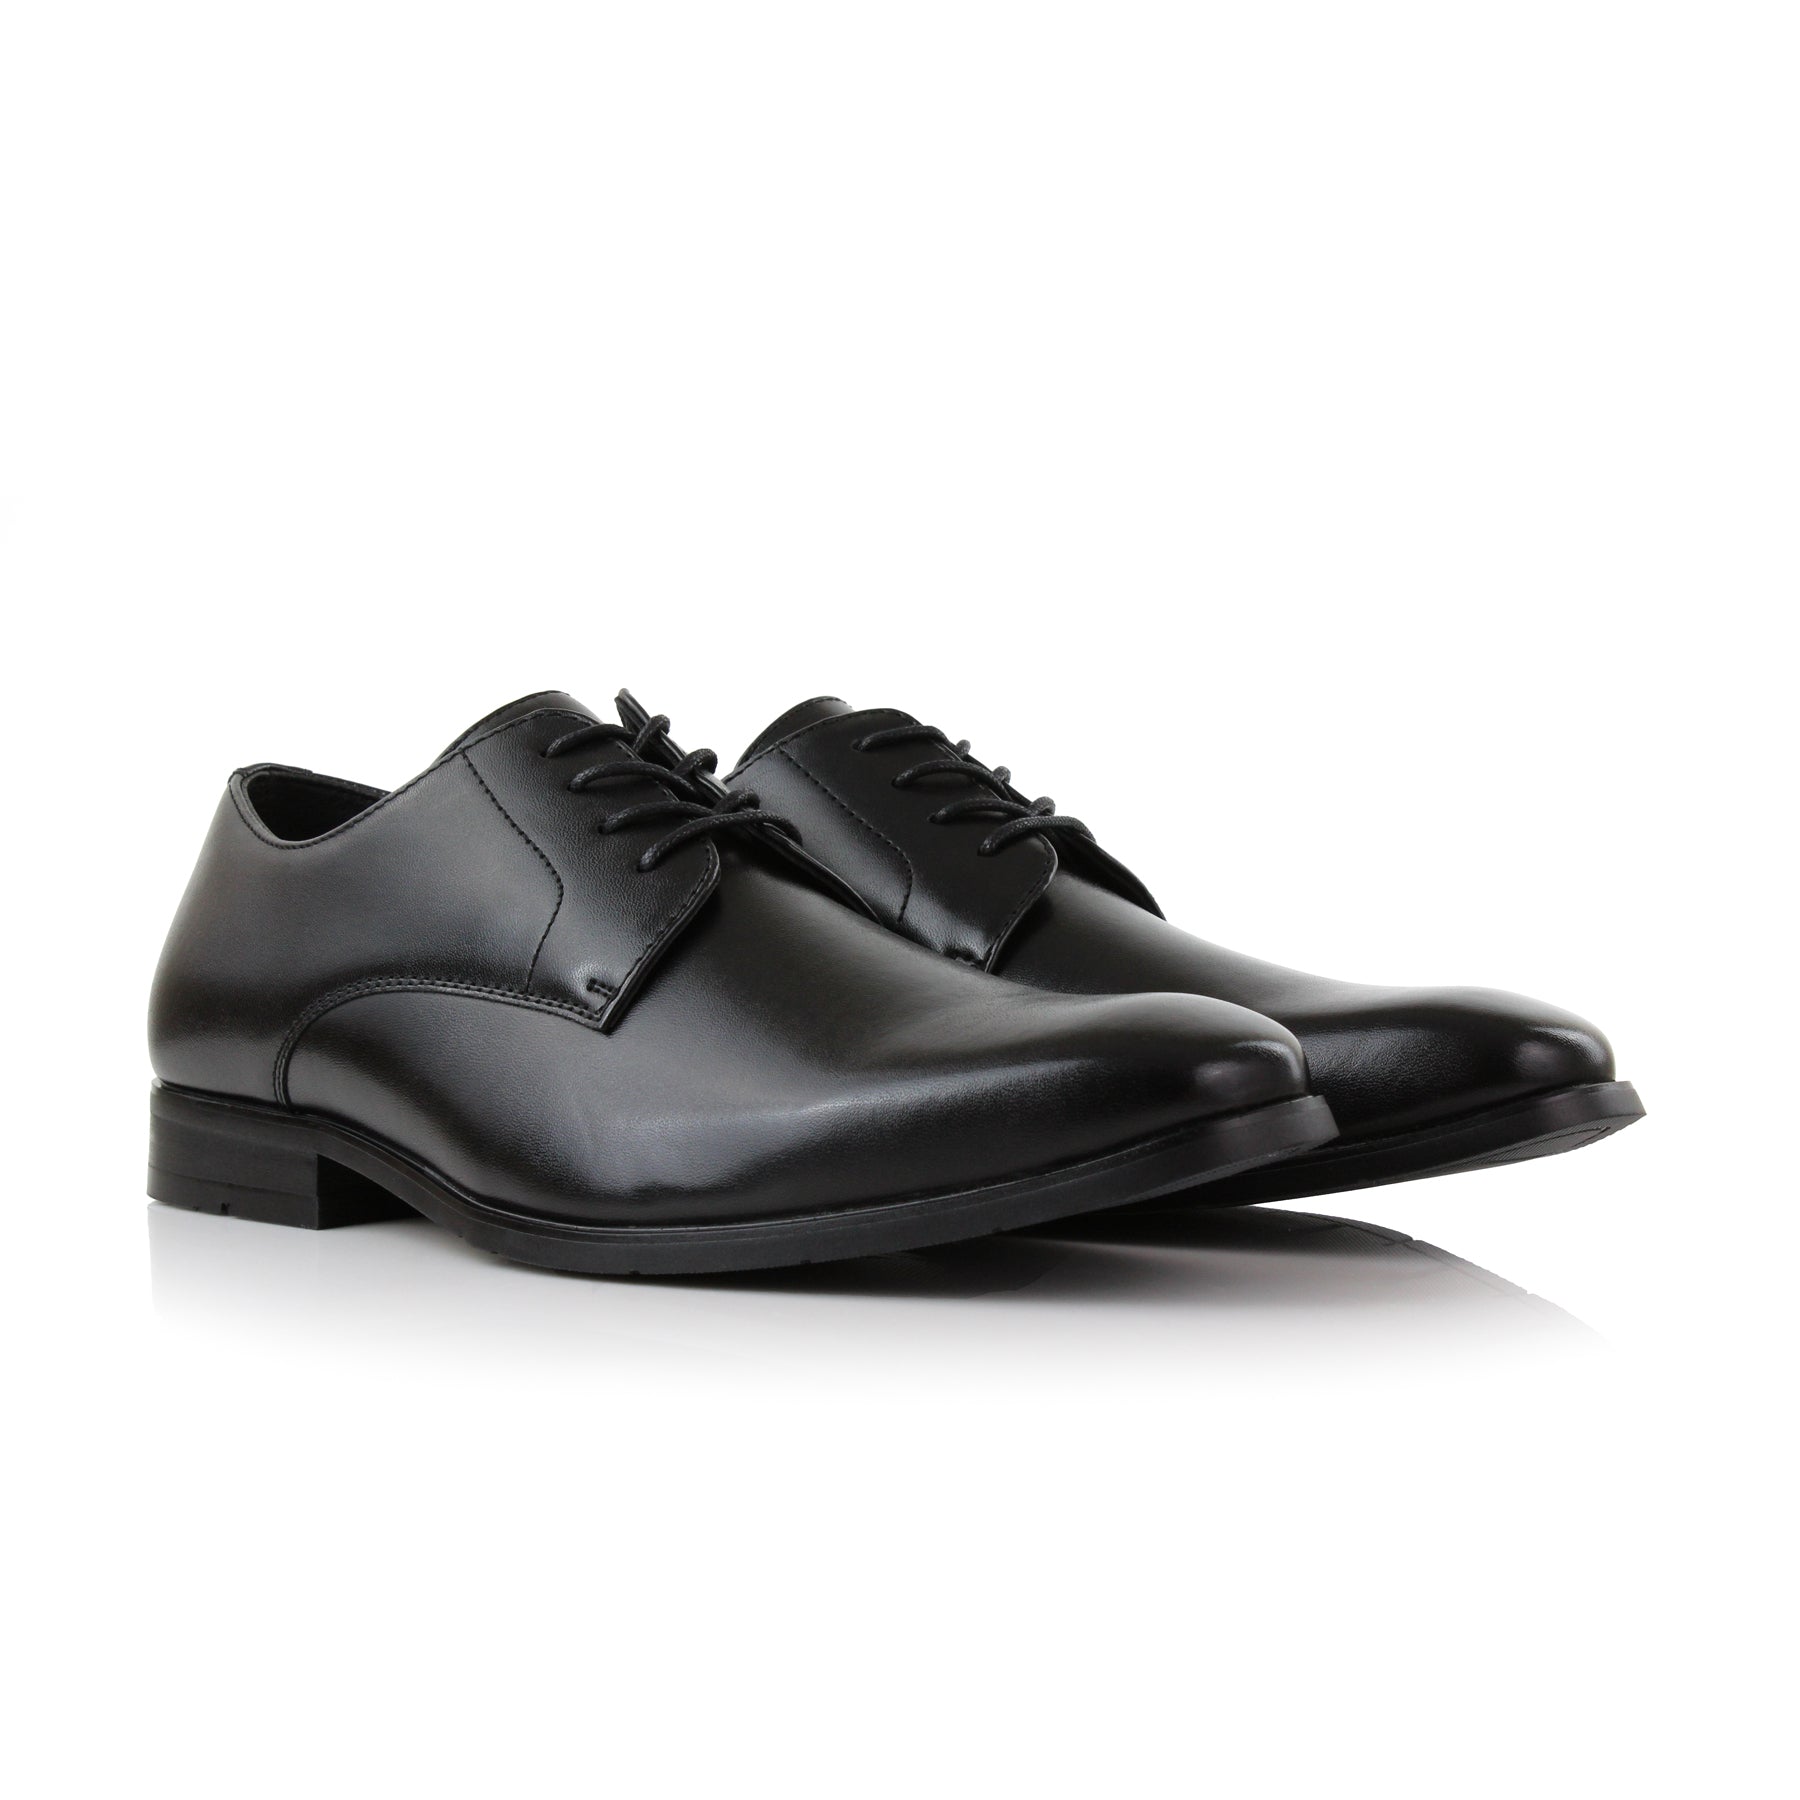 Plain Toe Derby Shoes | Alvin by Ferro Aldo | Conal Footwear | Paired Angle View